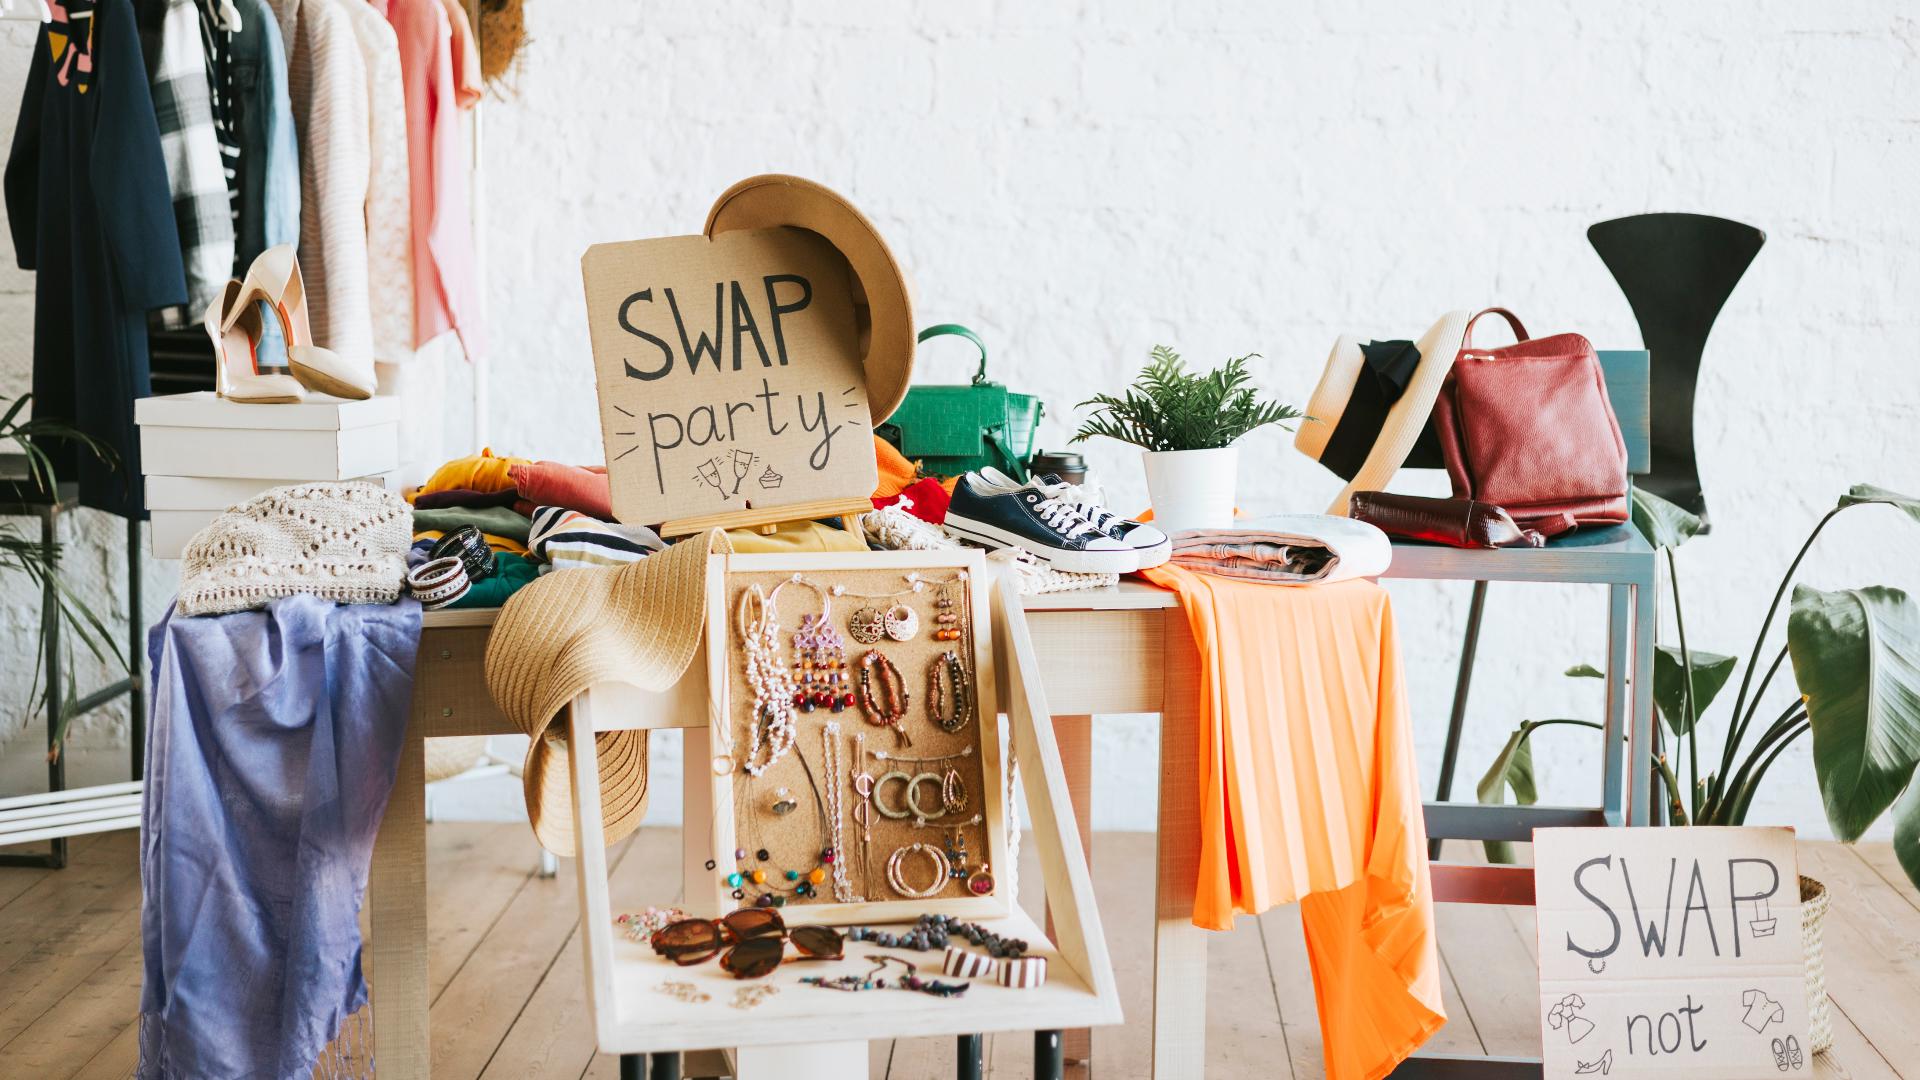 Zsameria Rayford, Founder of SwapDC, shares how her company helps you reduce, reuse and recycle things like clothes, books, vinyl and more through swap parties.